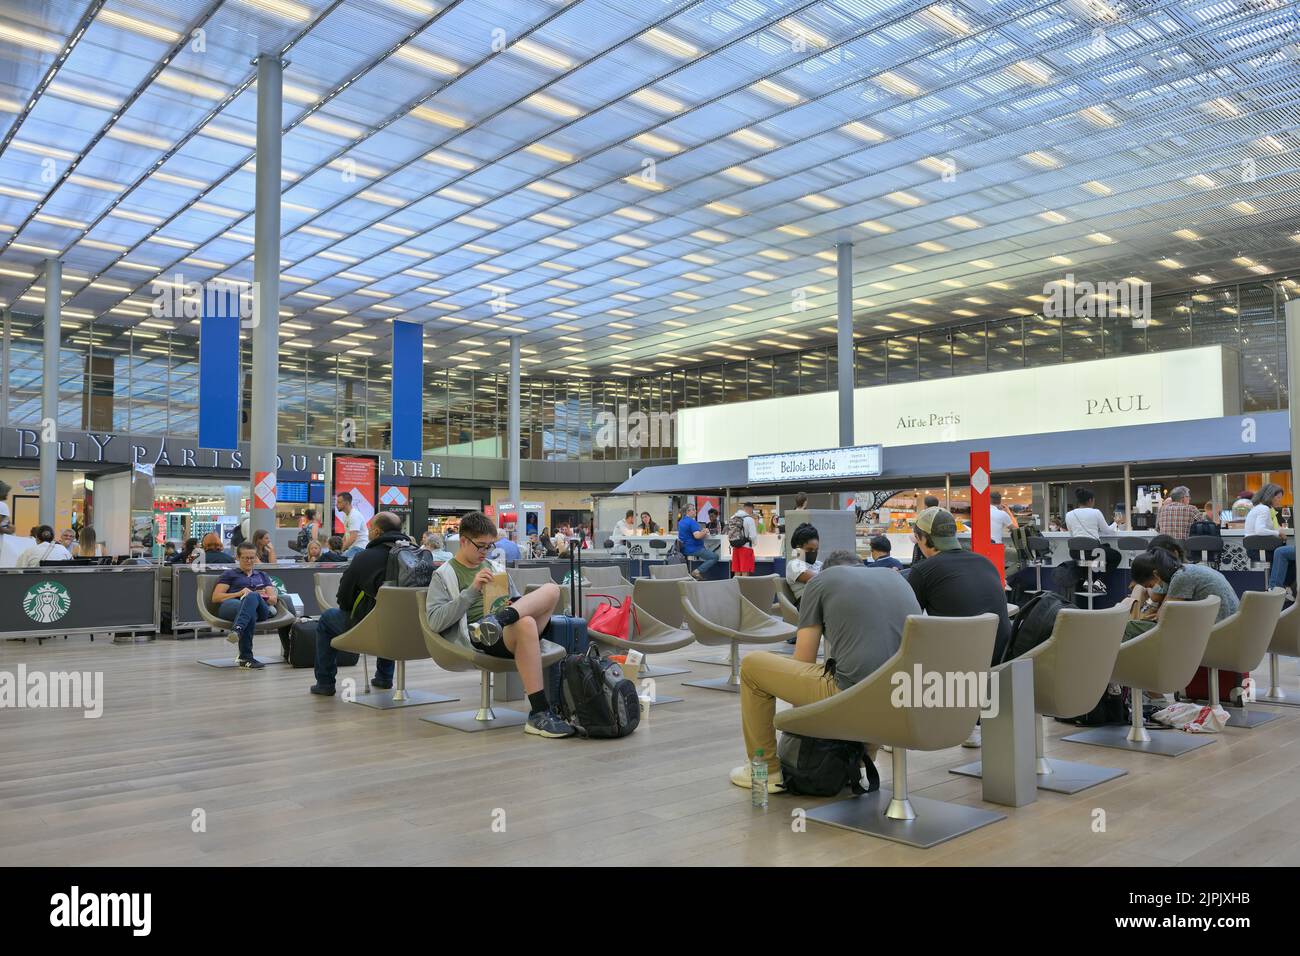 The modern departure Hall M of Terminal 2E at CDG airport, Paris Roissy FR Stock Photo